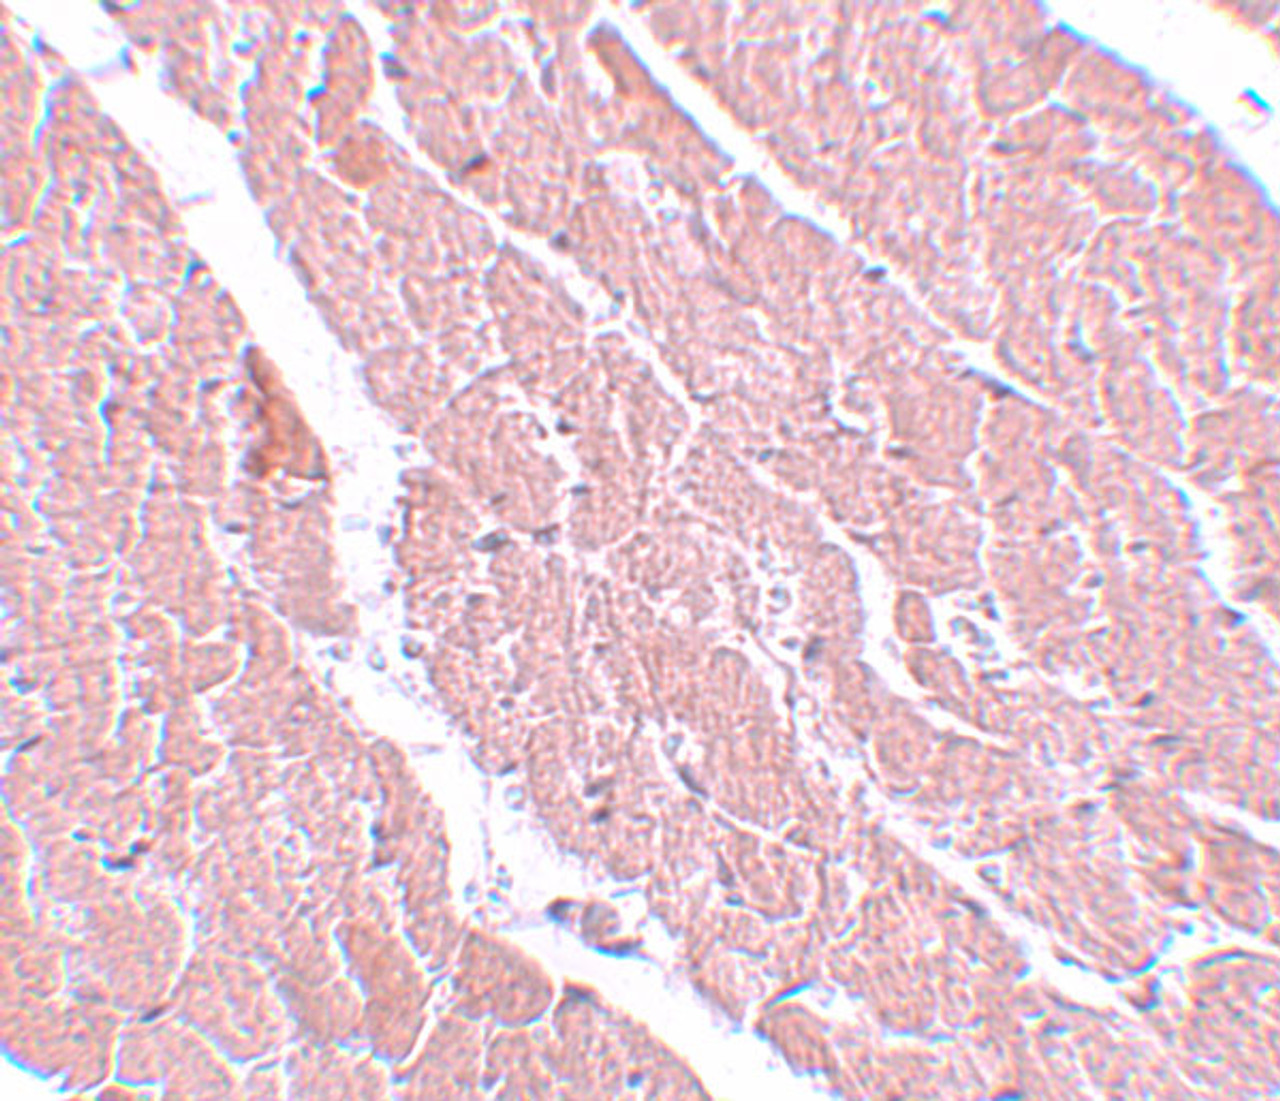 Immunohistochemistry of ATG13 in mouse heart with ATG13 antibody at 5 ug/mL.